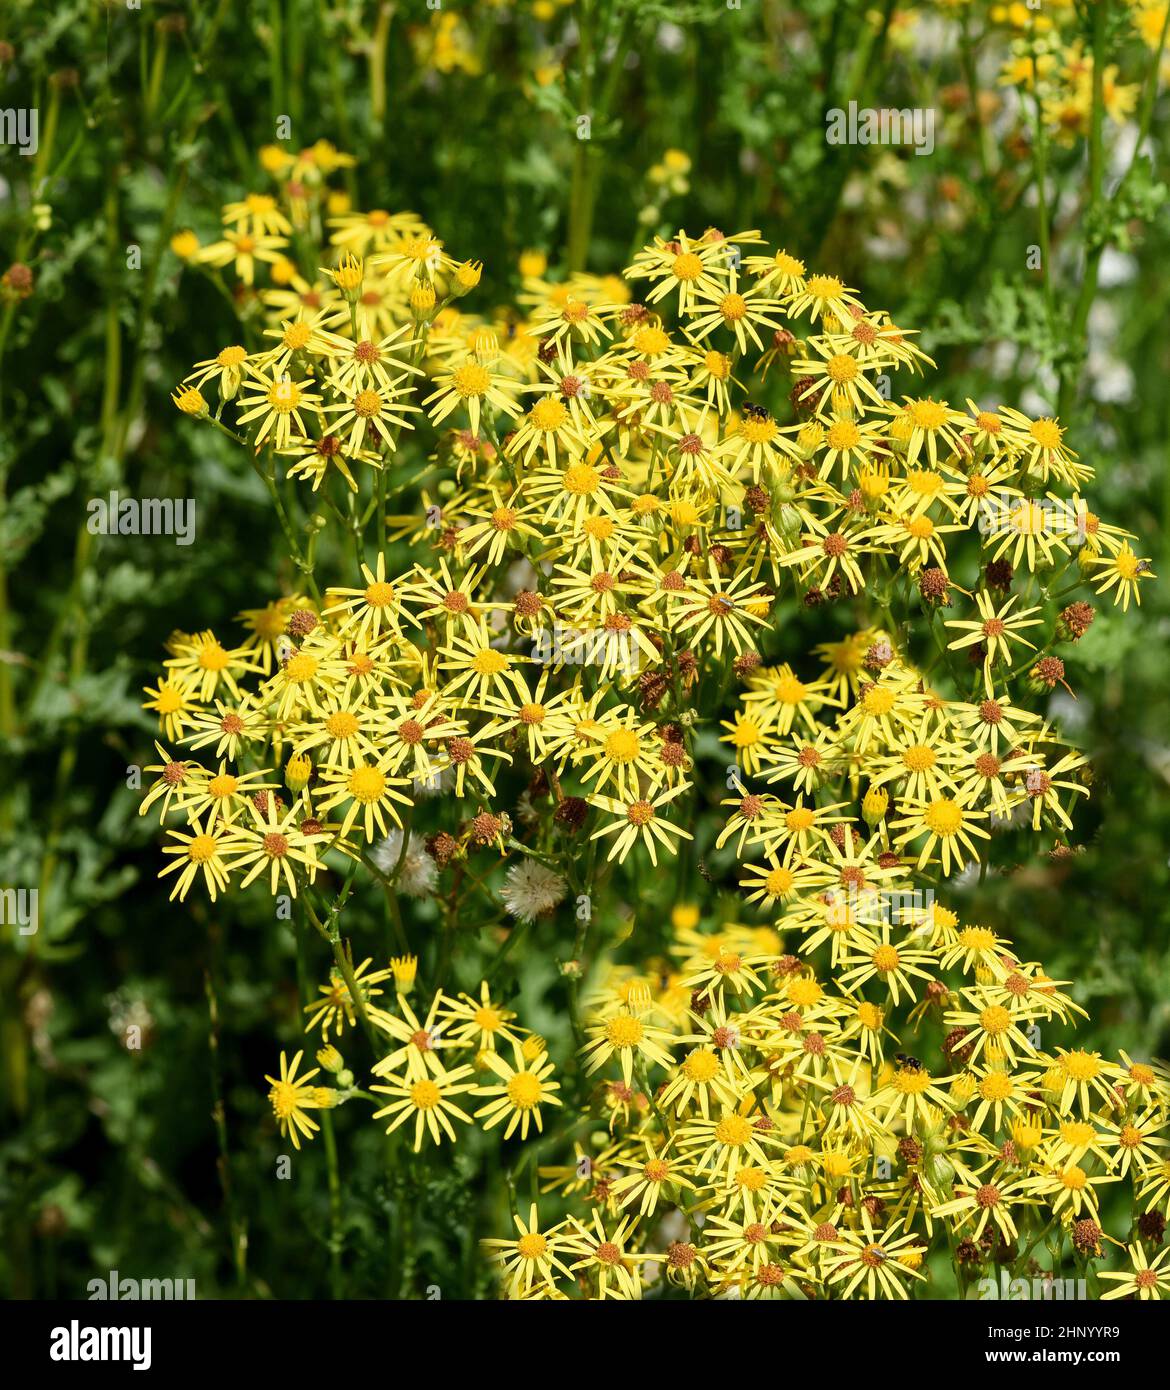 Jacobs ragwort, Senecio jacobeae, is a weed and a poisonous plant and very poisonous especially for grazing animals. Stock Photo